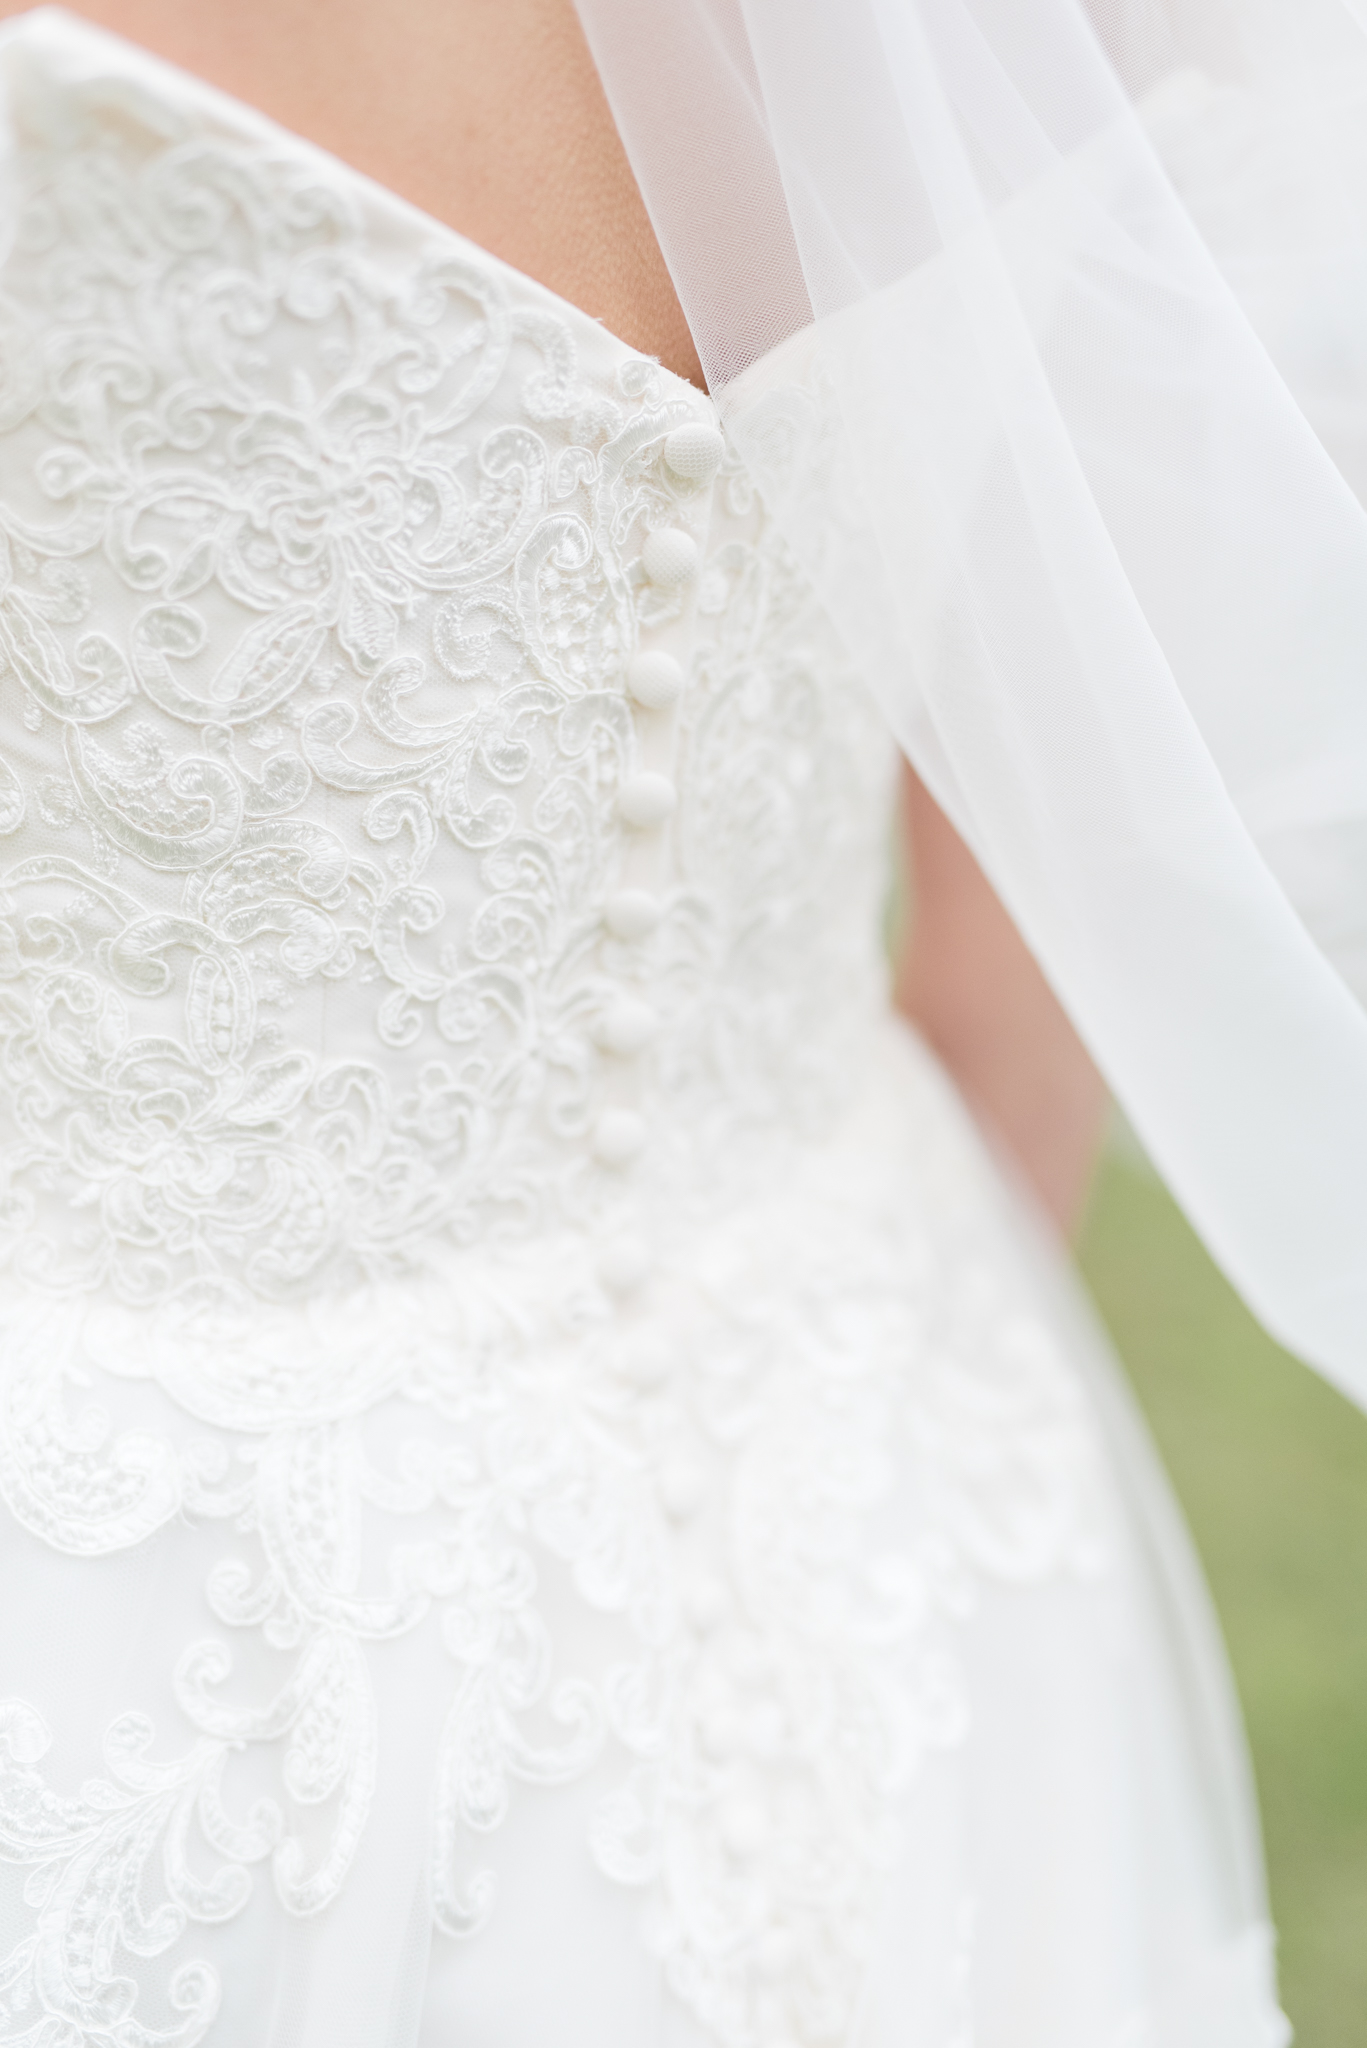 Lace and buttons on wedding gown.